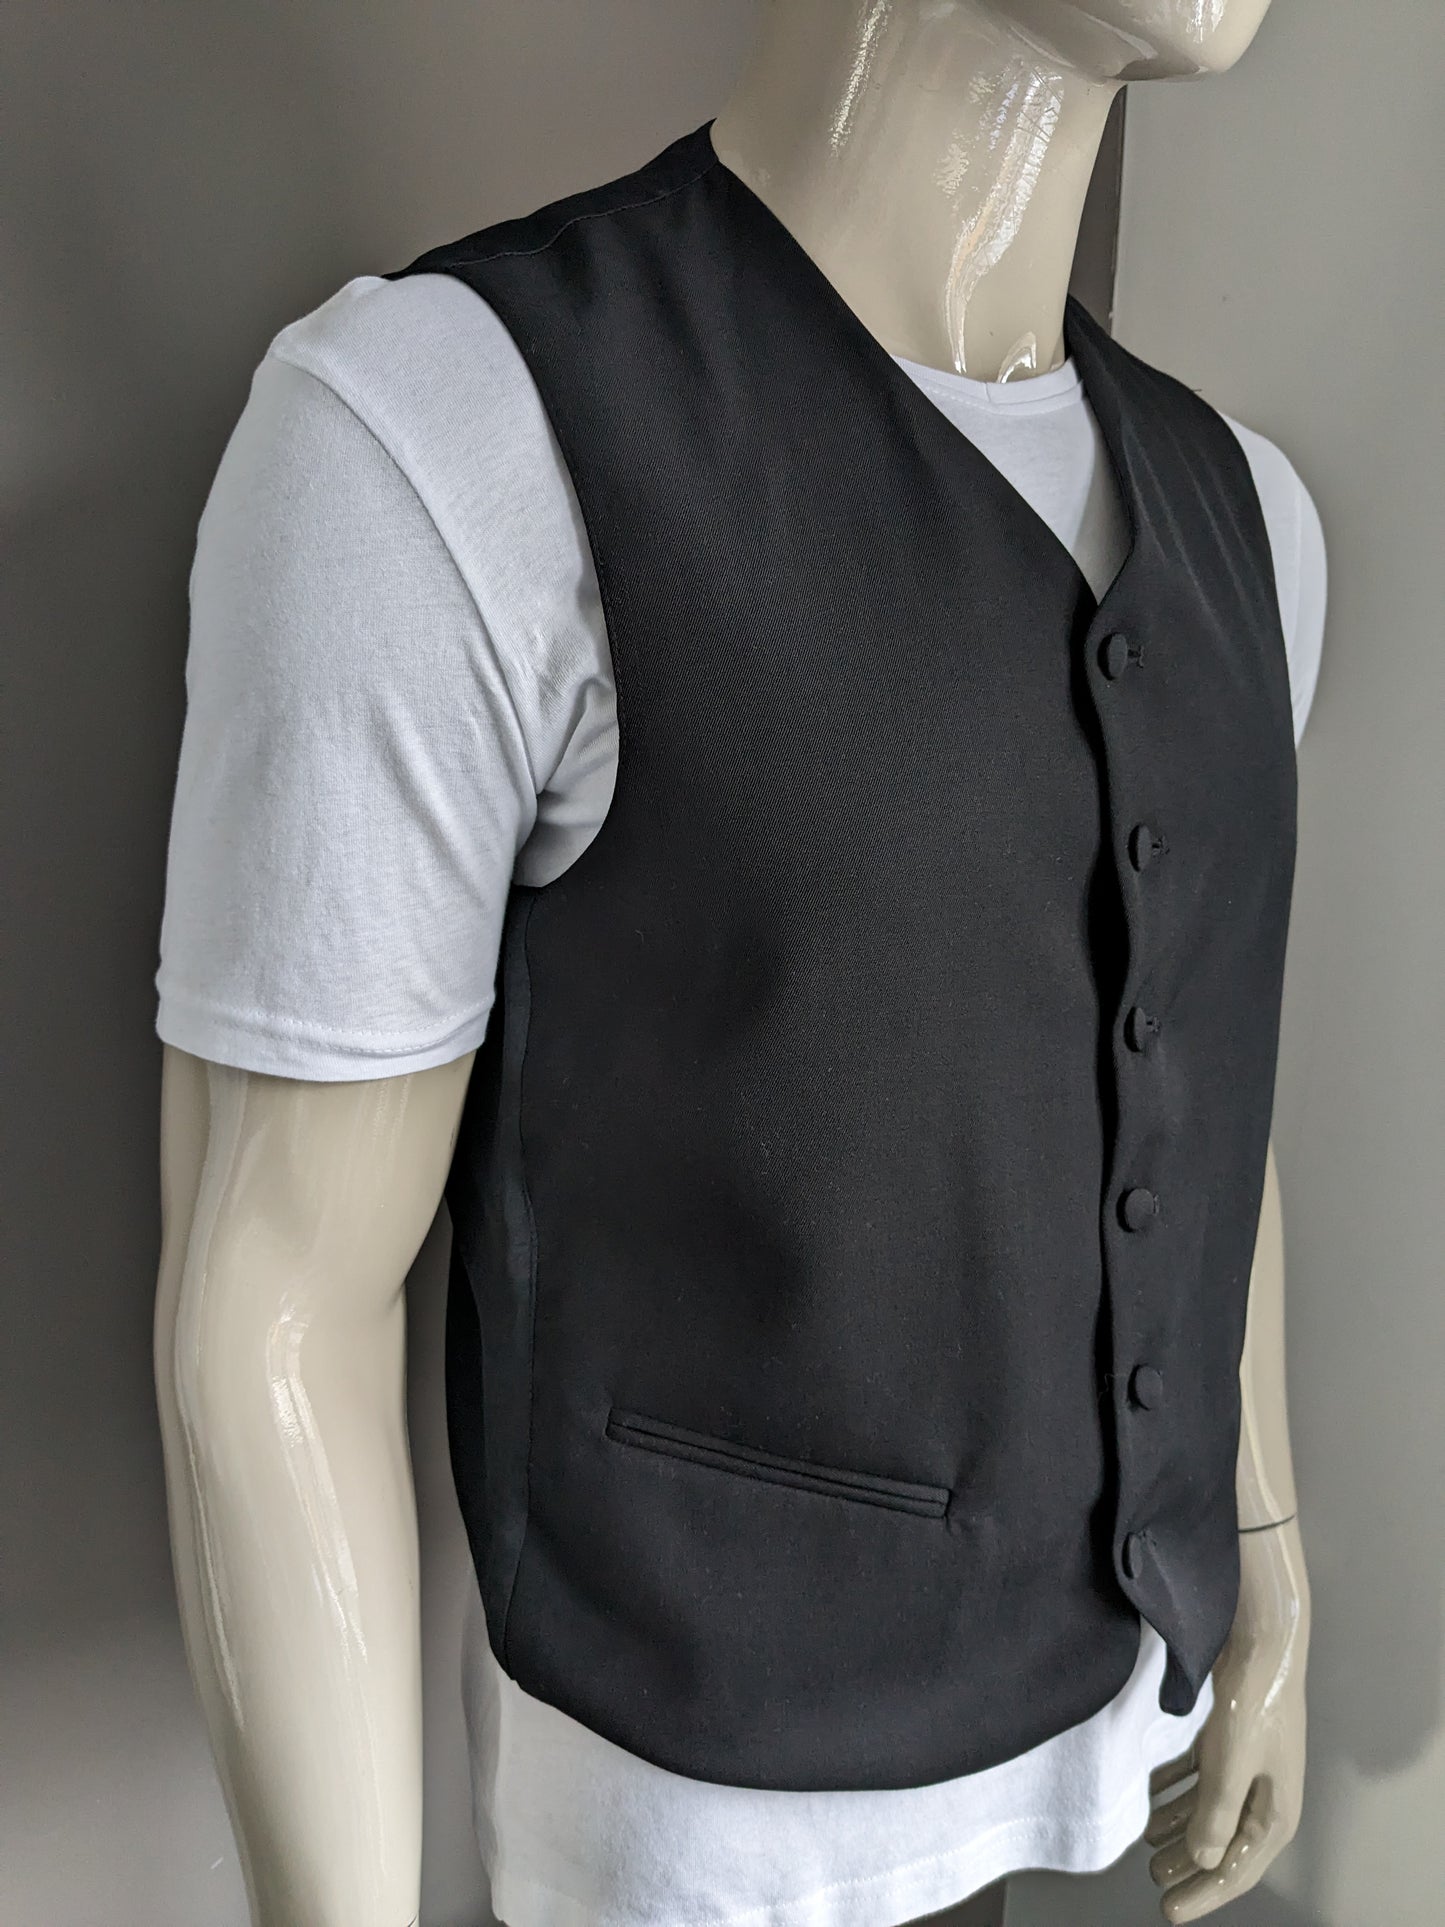 Gilet with upholstered buttons. Black colored. Size M. #337.